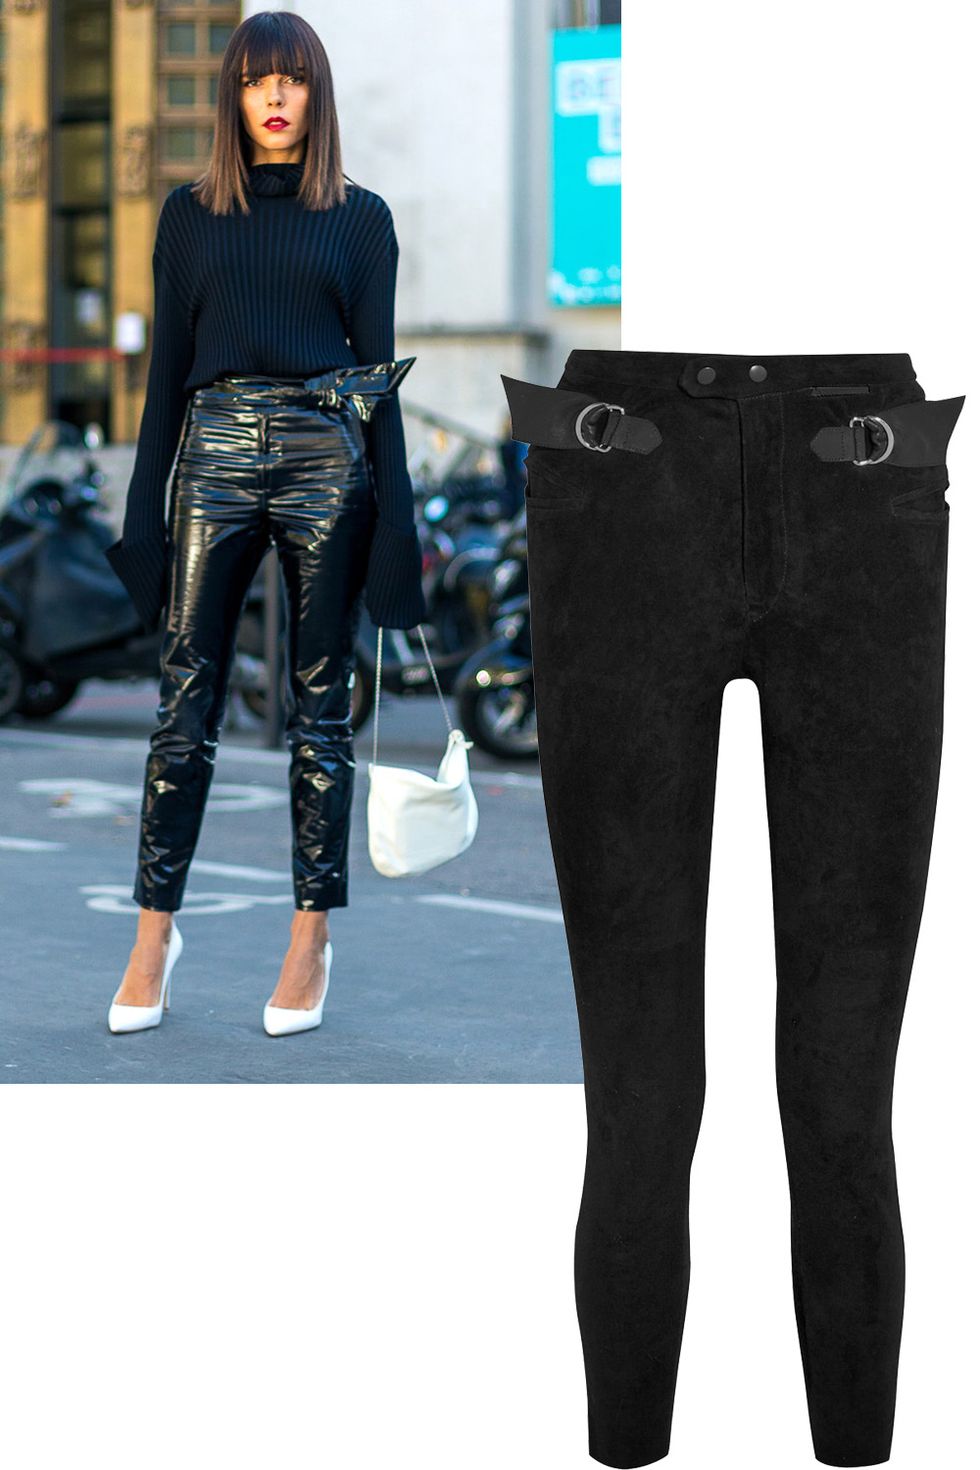 <p>Who: Evangelie Smyrniotaki<span class="redactor-invisible-space"></span></p><p>What: Skinny leather pants make a statement—worn with&nbsp;a cozy sweater for comfort.&nbsp;</p><p><em data-redactor-tag="em" data-verified="redactor">Isabel Marant pants, $1,705</em><span class="redactor-invisible-space" data-verified="redactor" data-redactor-tag="span" data-redactor-class="redactor-invisible-space"><em data-redactor-tag="em" data-verified="redactor">, <a href="https://www.net-a-porter.com/us/en/product/755524/Isabel_Marant/gabe-suede-skinny-pants" target="_blank">matchesfashion.com</a>.&nbsp;</em></span></p>